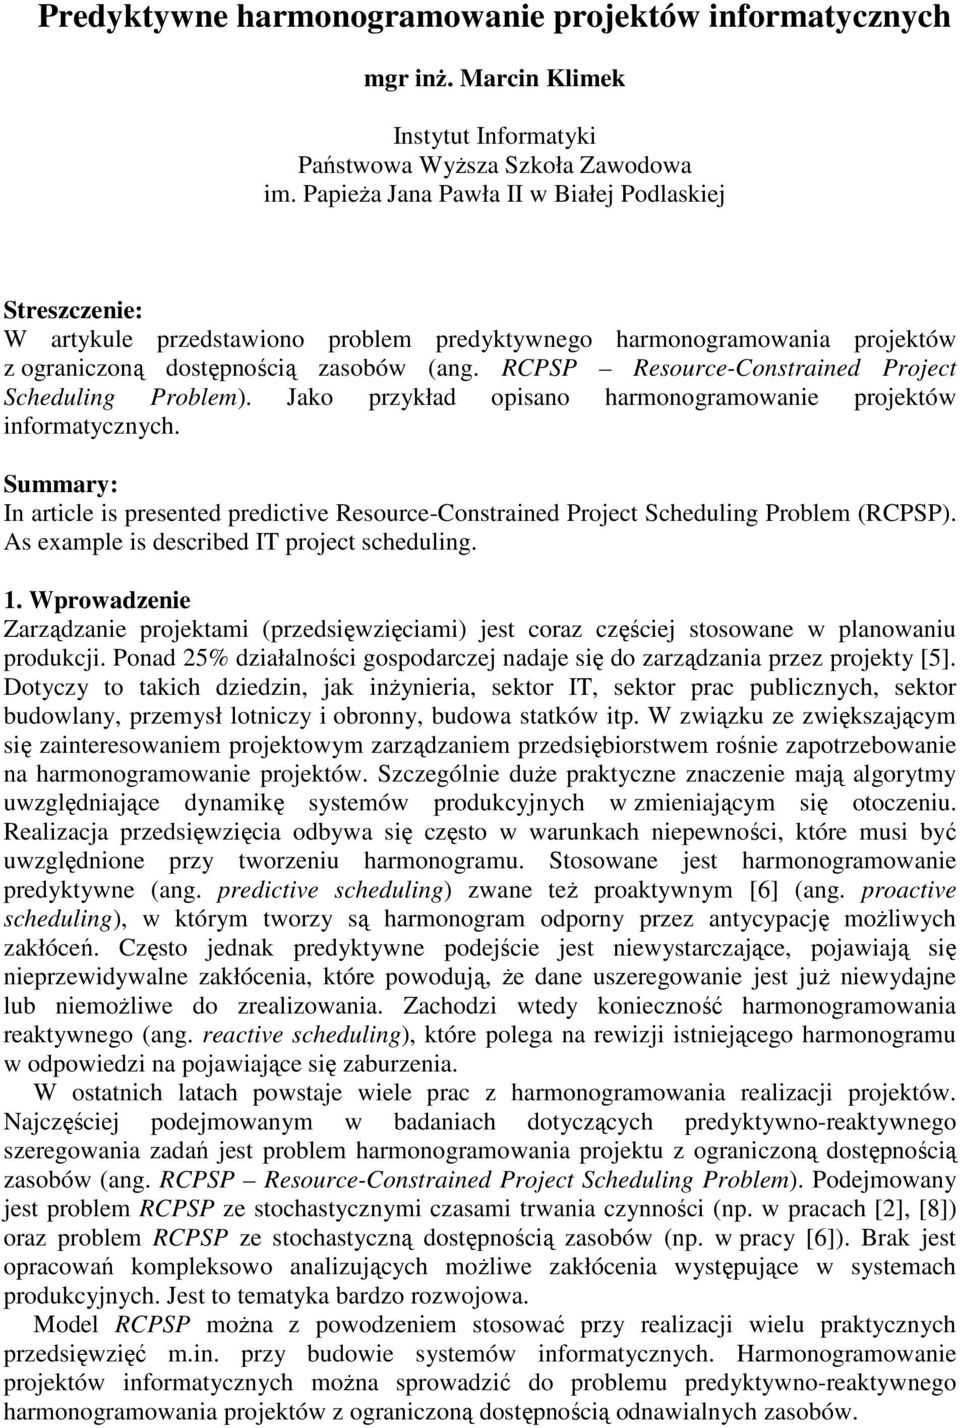 Jako przykład opsao harmoogramowae proektów formatyczych. Summary: I artcle s preseted predctve Resource-Costraed Proect Schedulg Problem (RCPSP). As example s descrbed IT proect schedulg. 1.